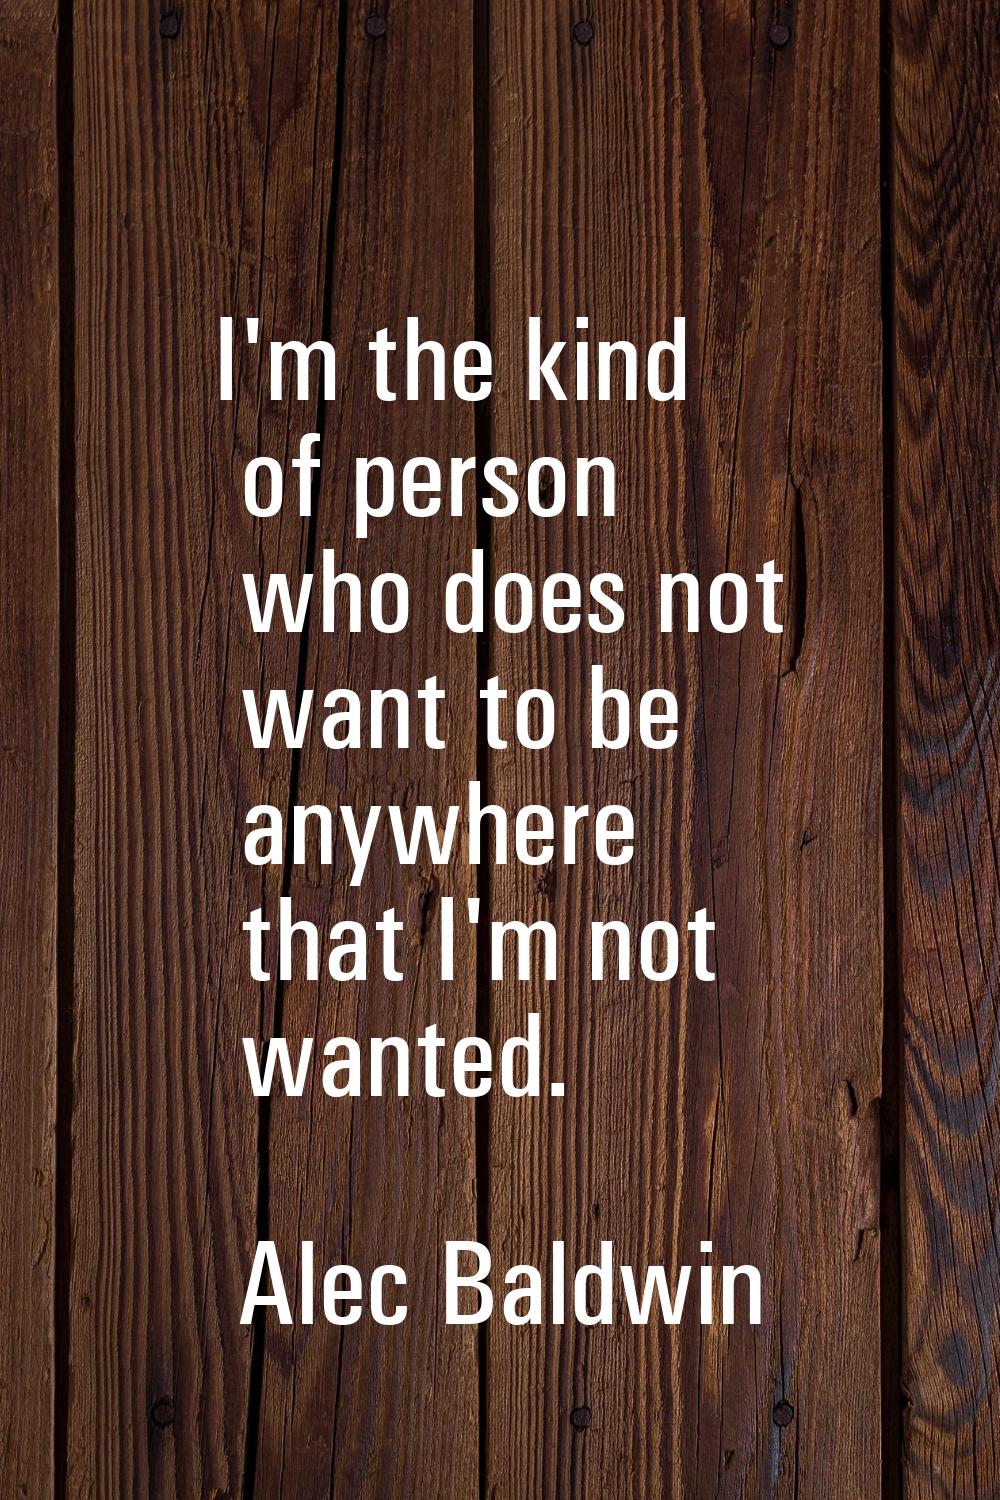 I'm the kind of person who does not want to be anywhere that I'm not wanted.